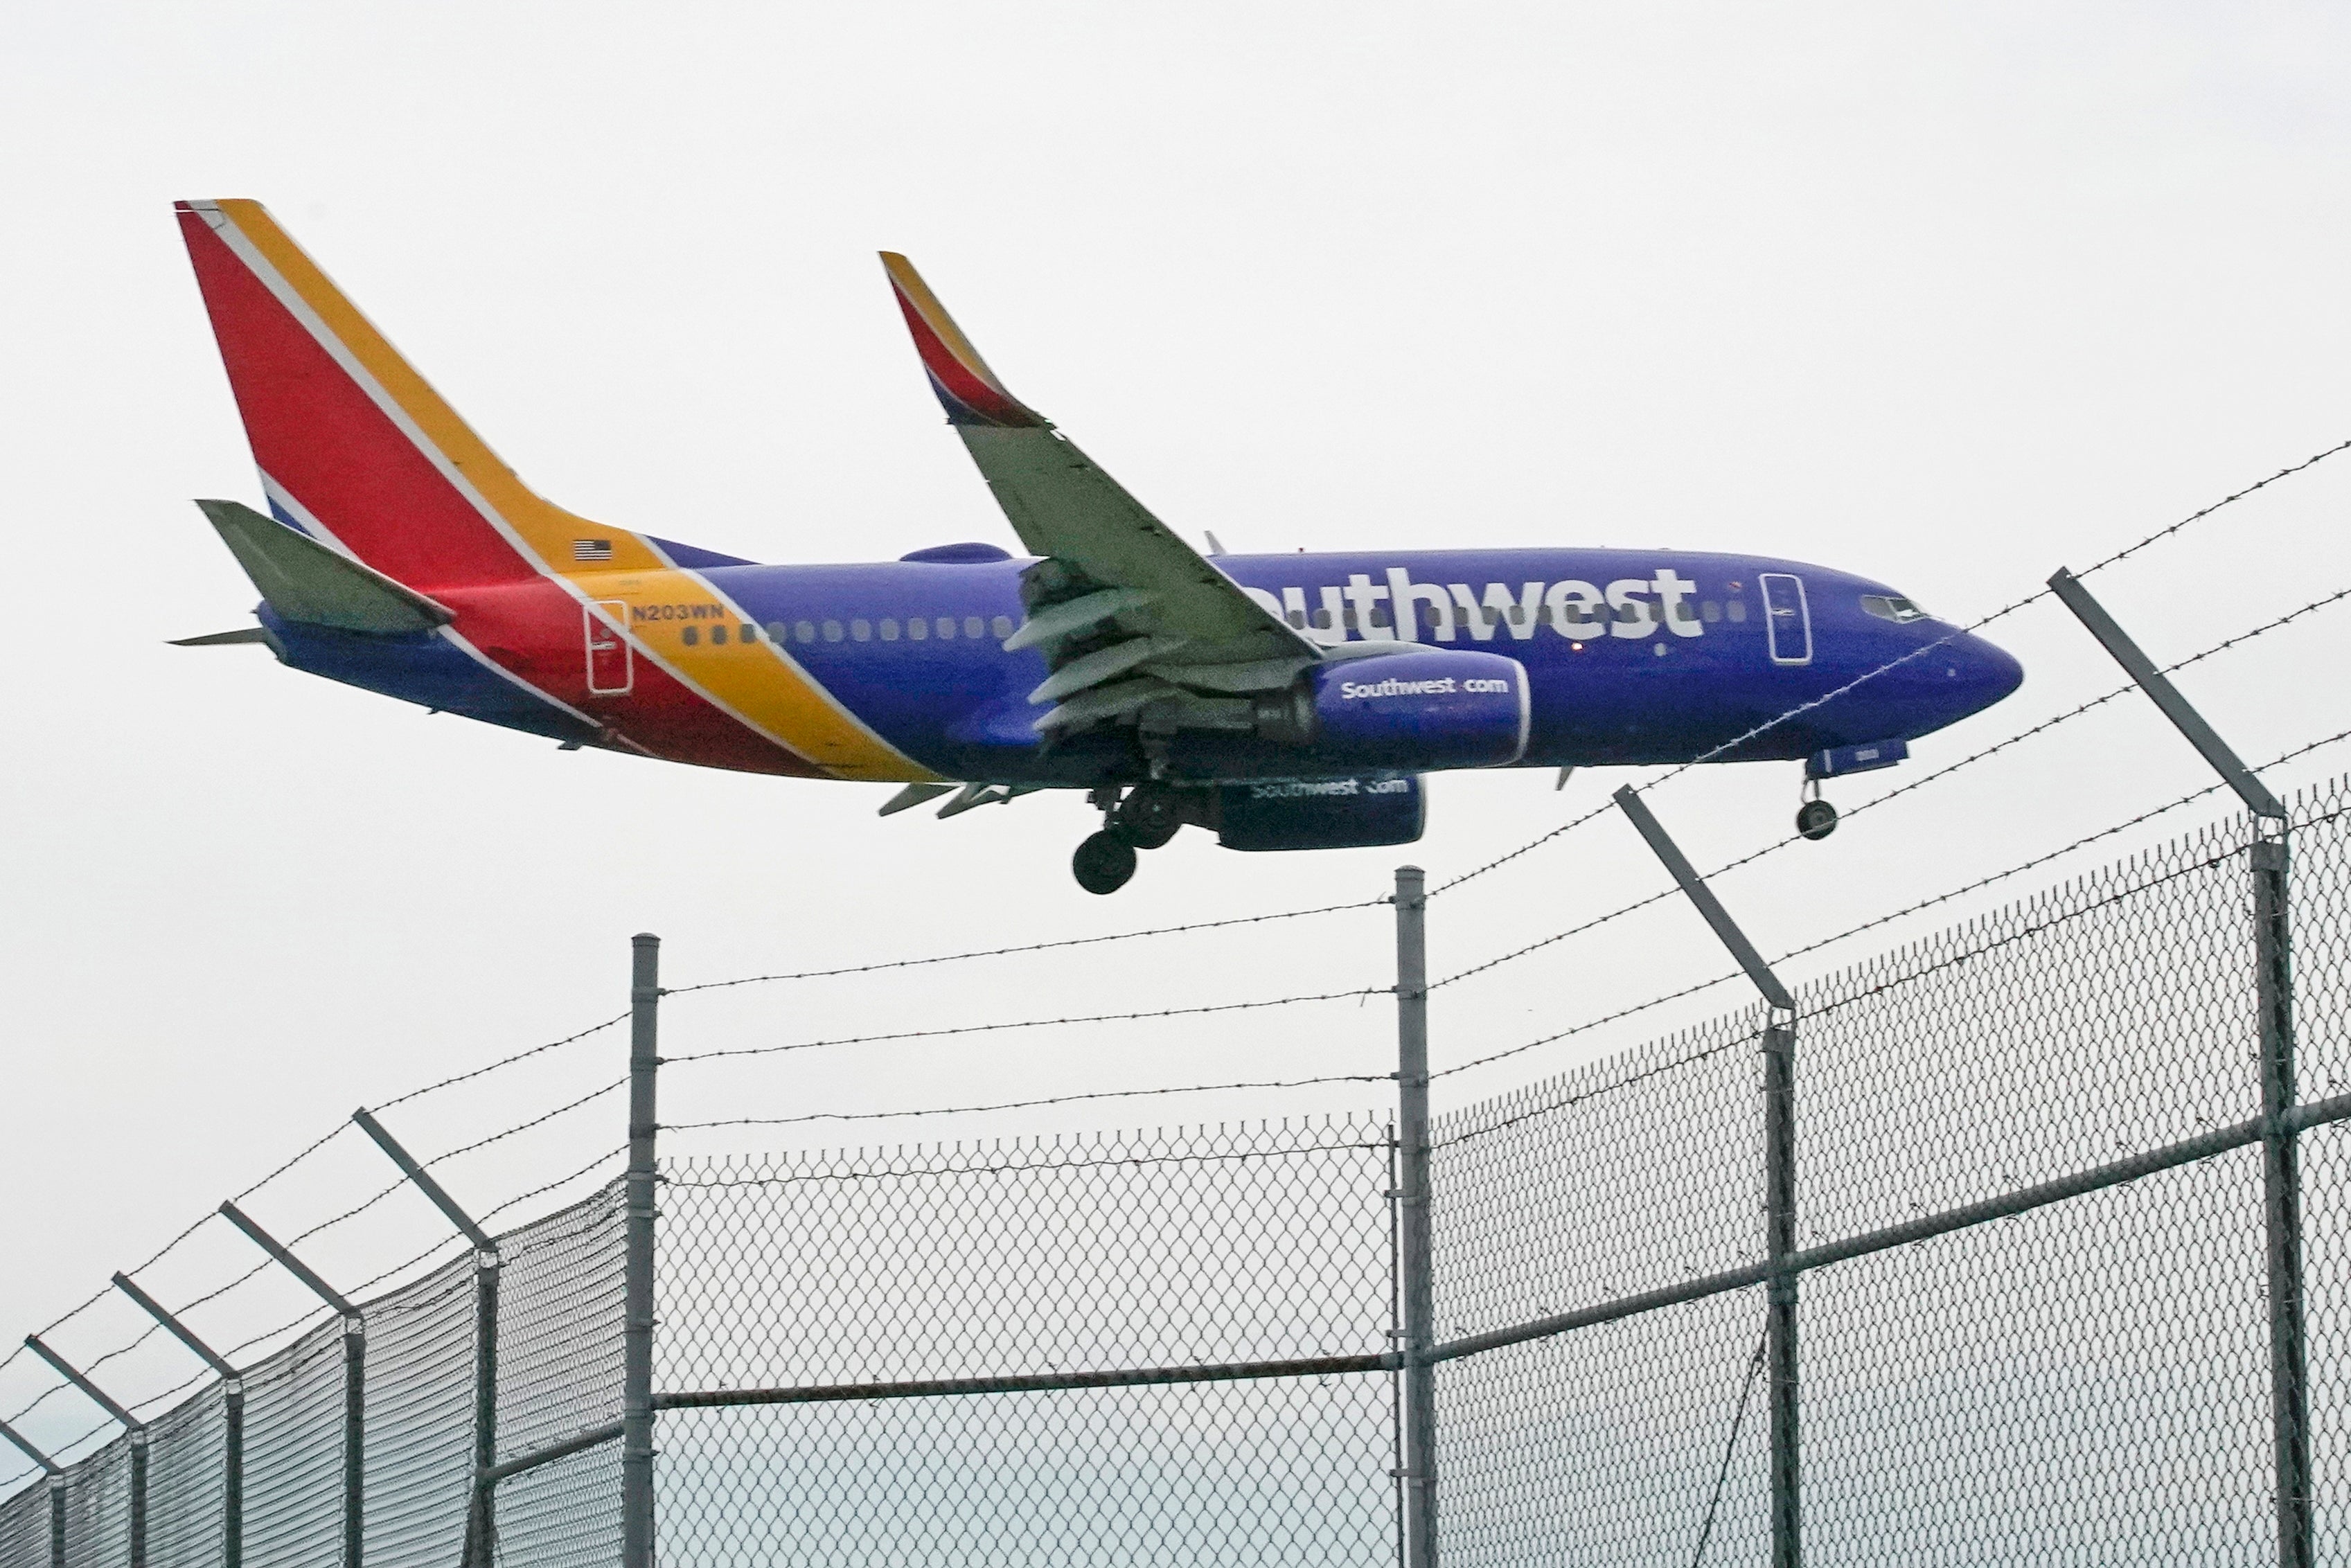 File photo: Southwest Airlines flight lands at General Mitchell International Airport